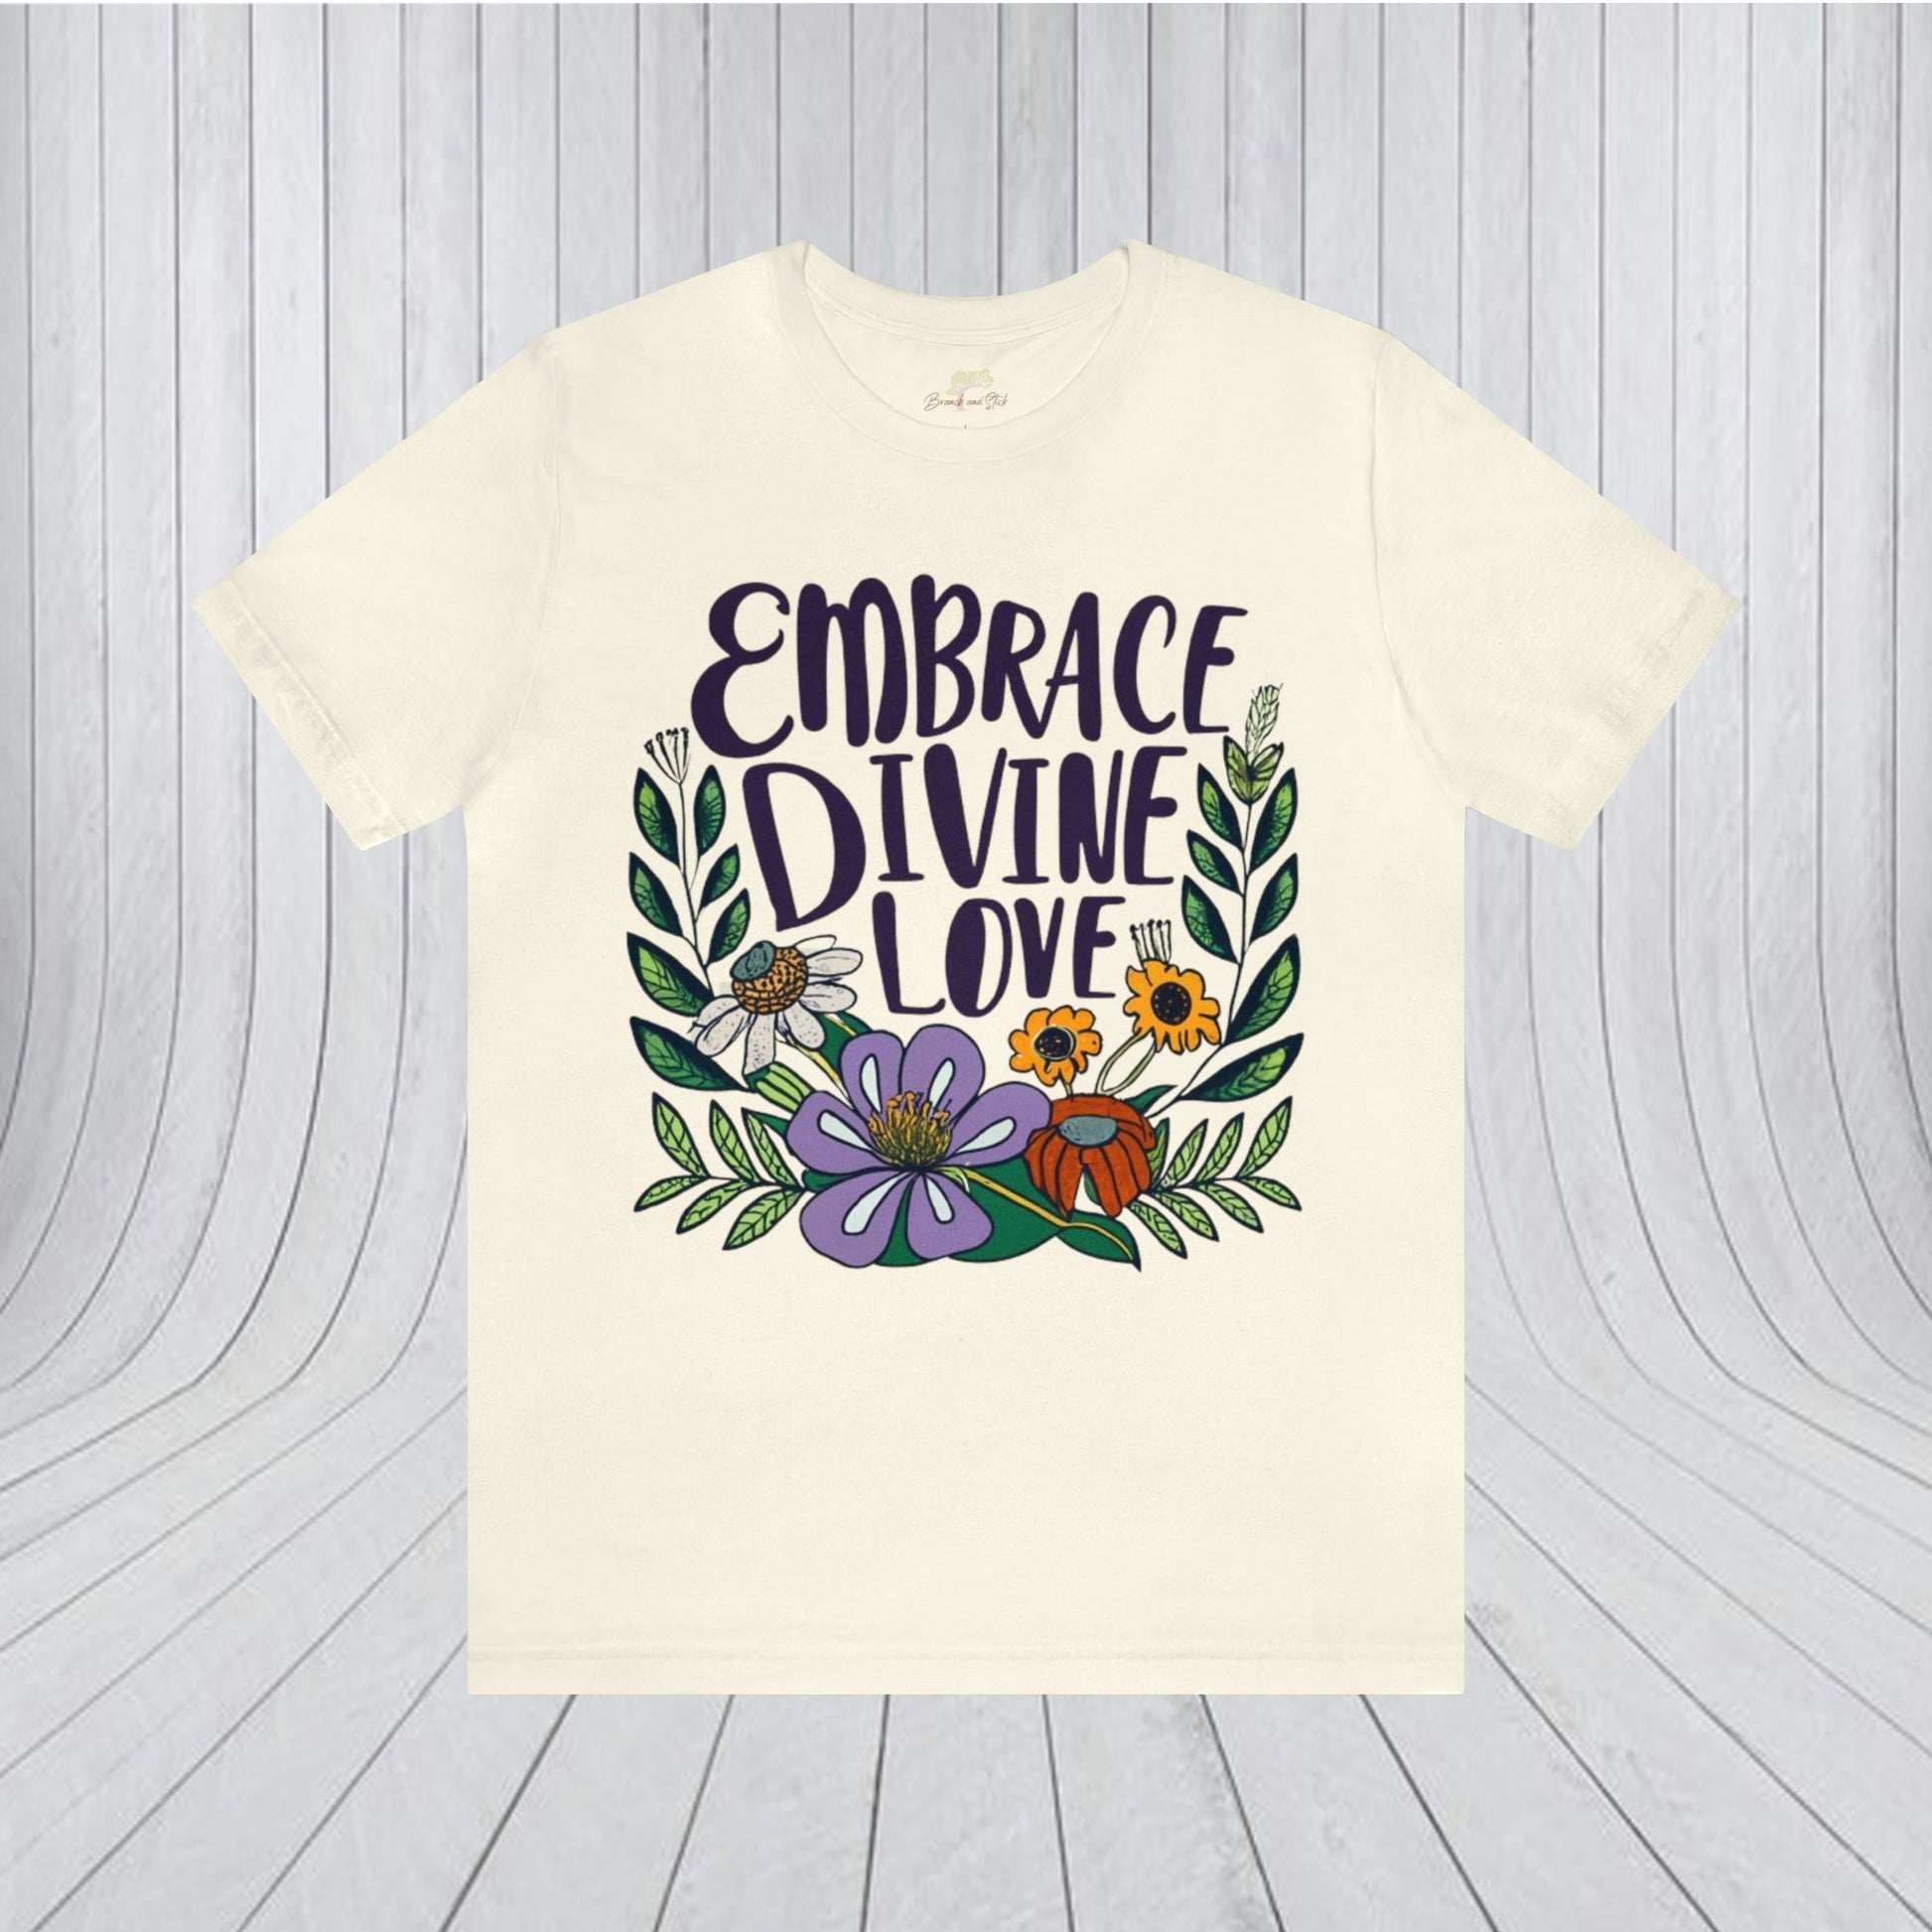 Minimalistic Wildflowers and Affirmation Words T-Shirt | Nature-Inspired Elegance - Branch and Stick Branch and Stick